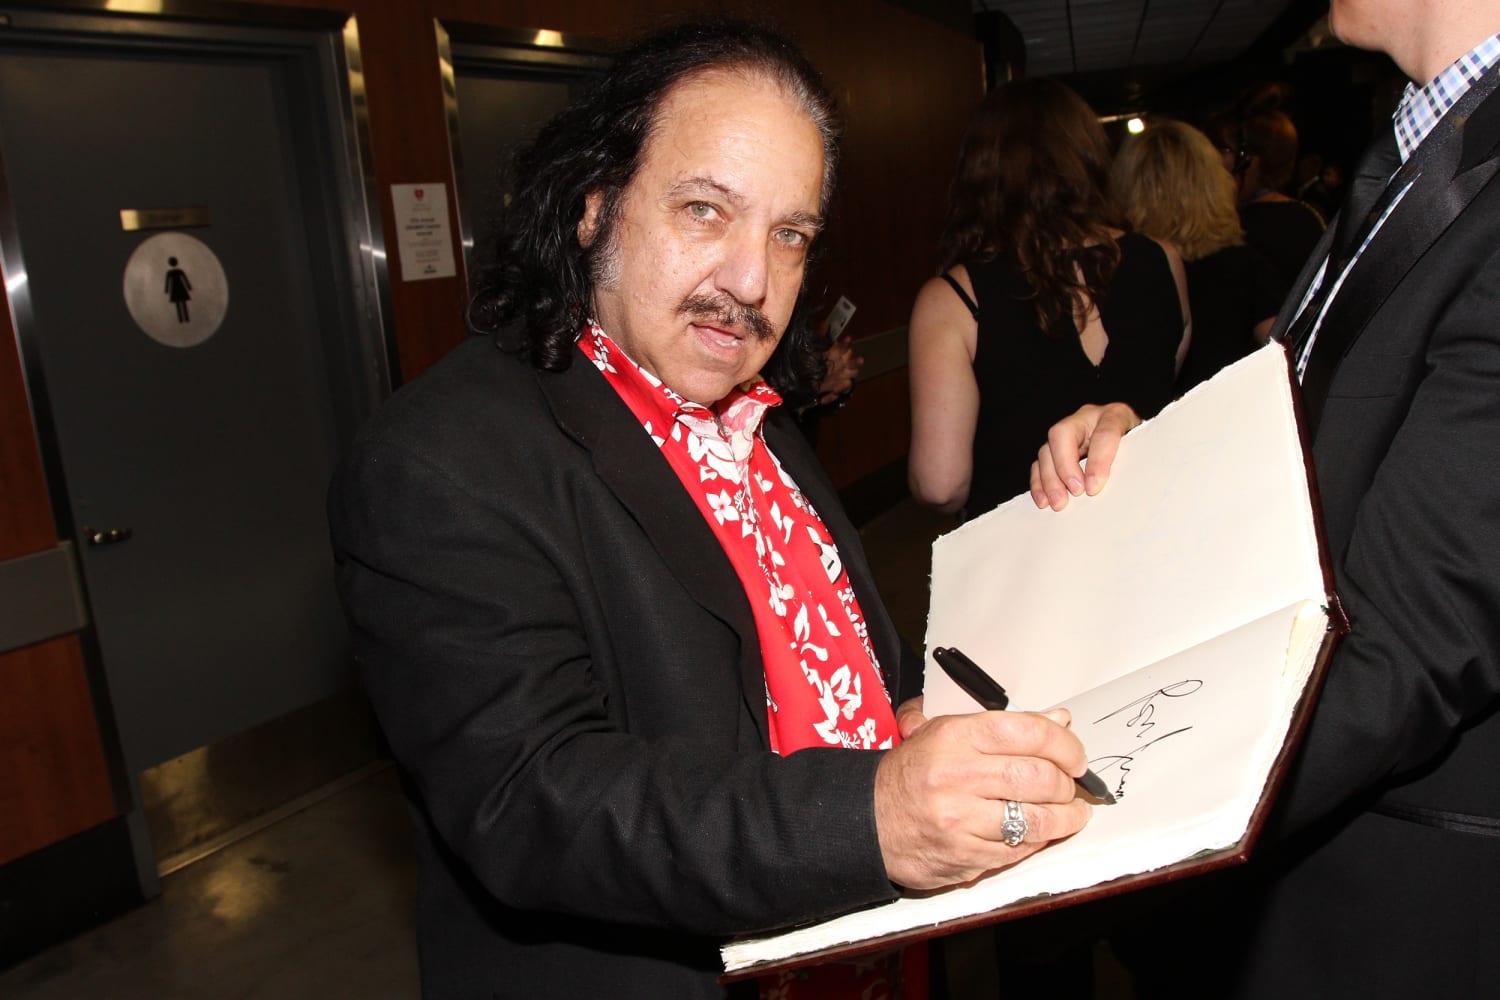 Police Xxx Video Rap - Porn actor Ron Jeremy charged with rape, sexual assault